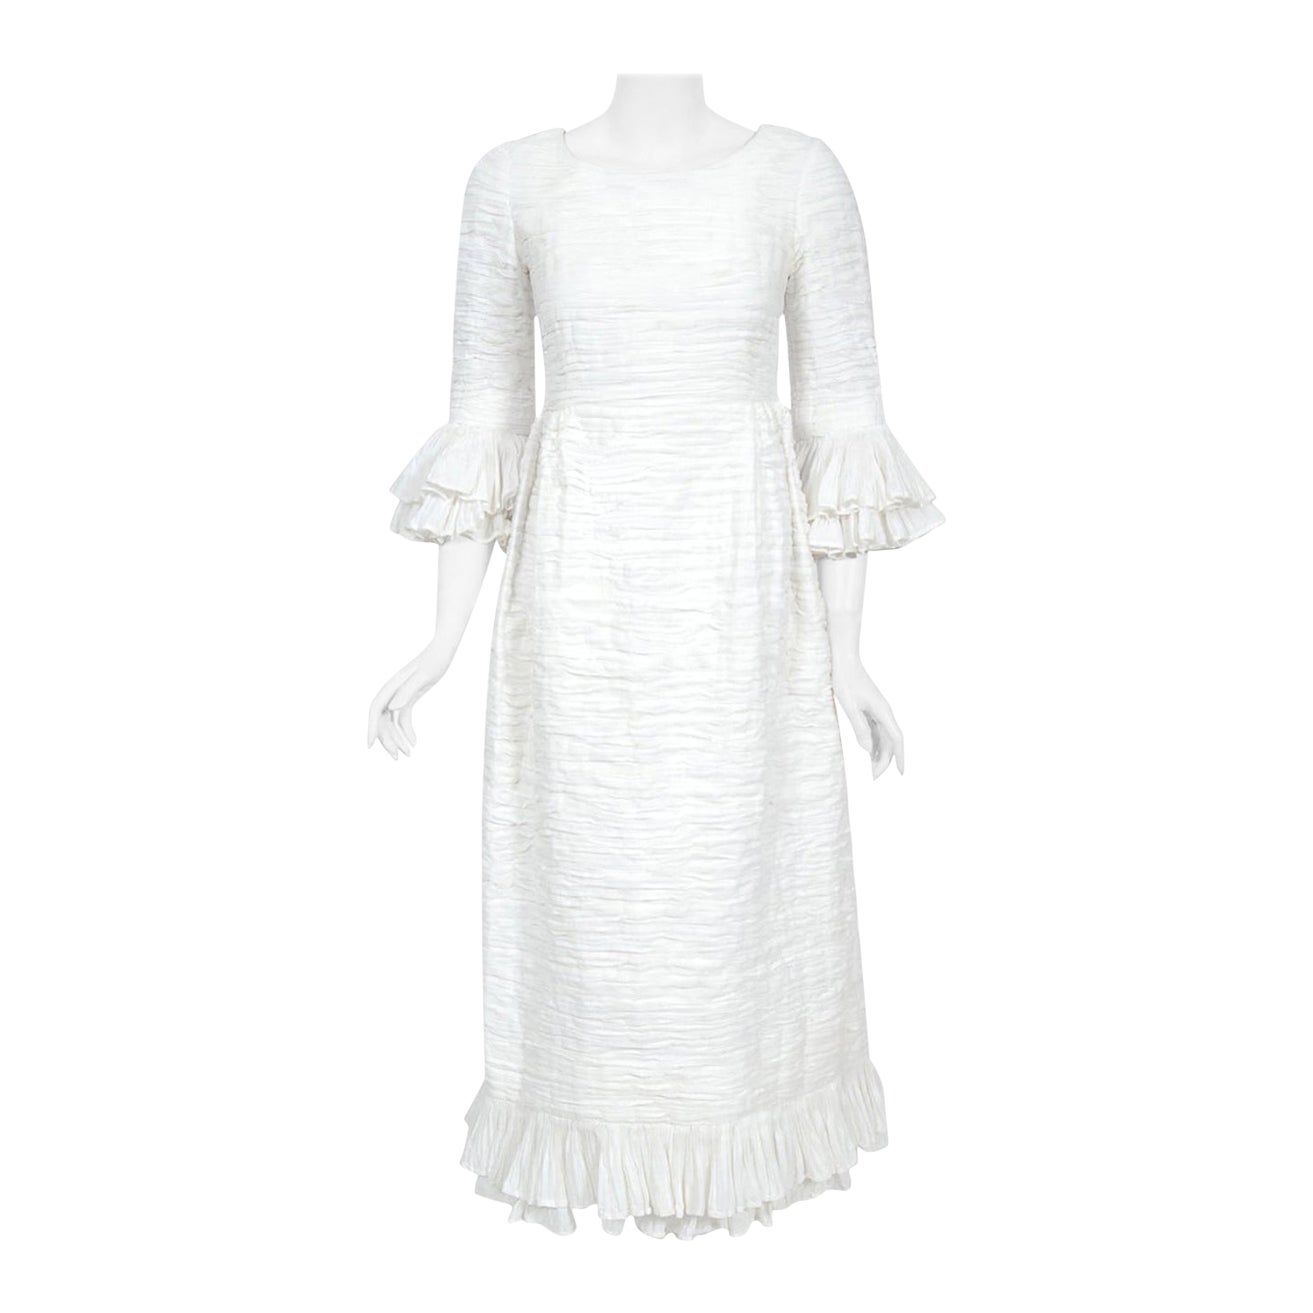 Rare 1960's Sybil Connolly Couture Pleated White Linen Bell-Sleeve Bridal Dress